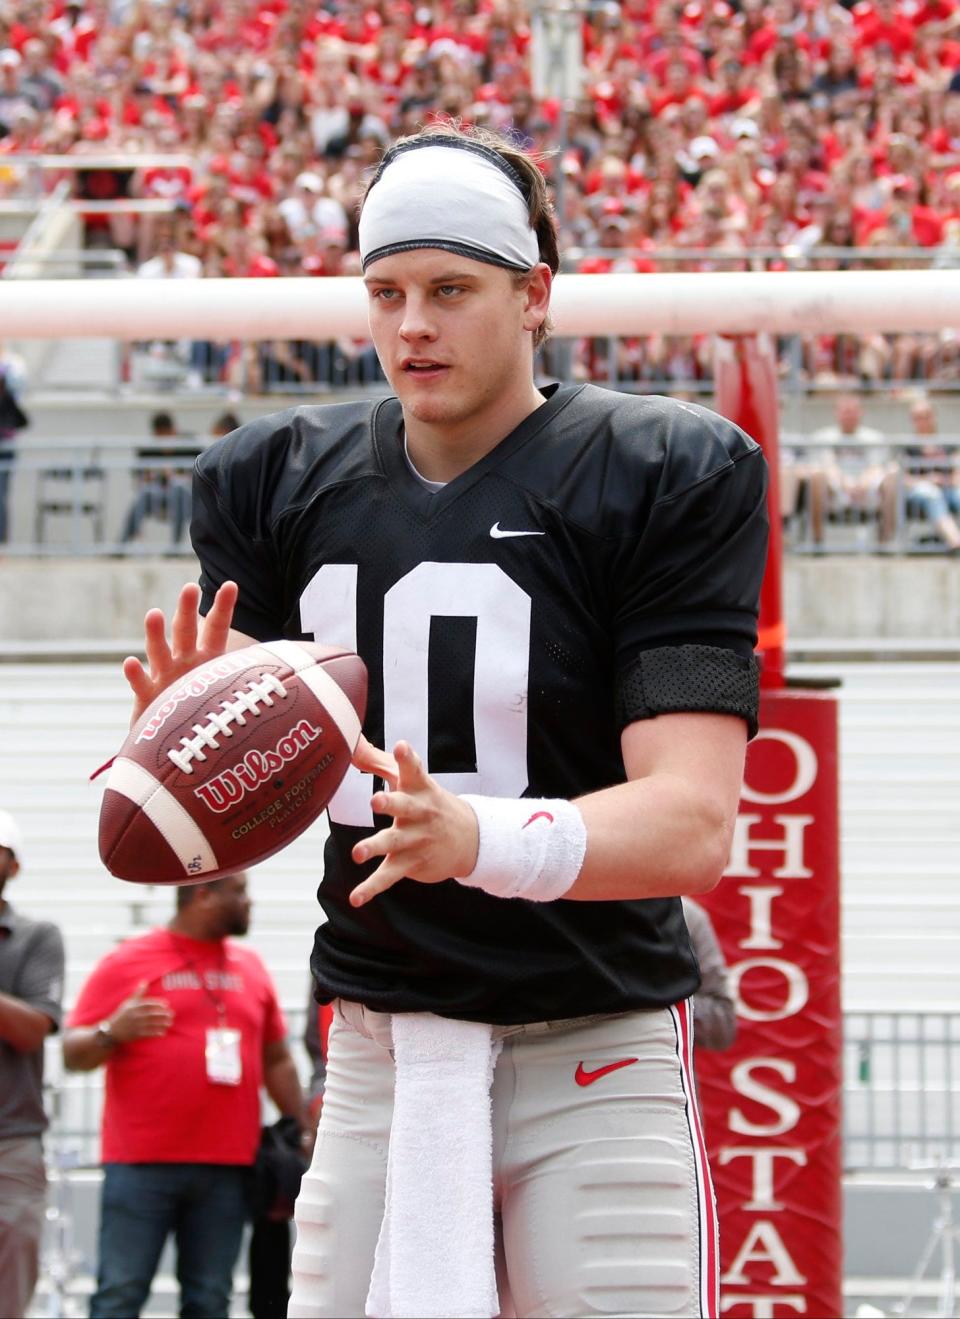 Joe Burrow at the Ohio State spring game in 2017.